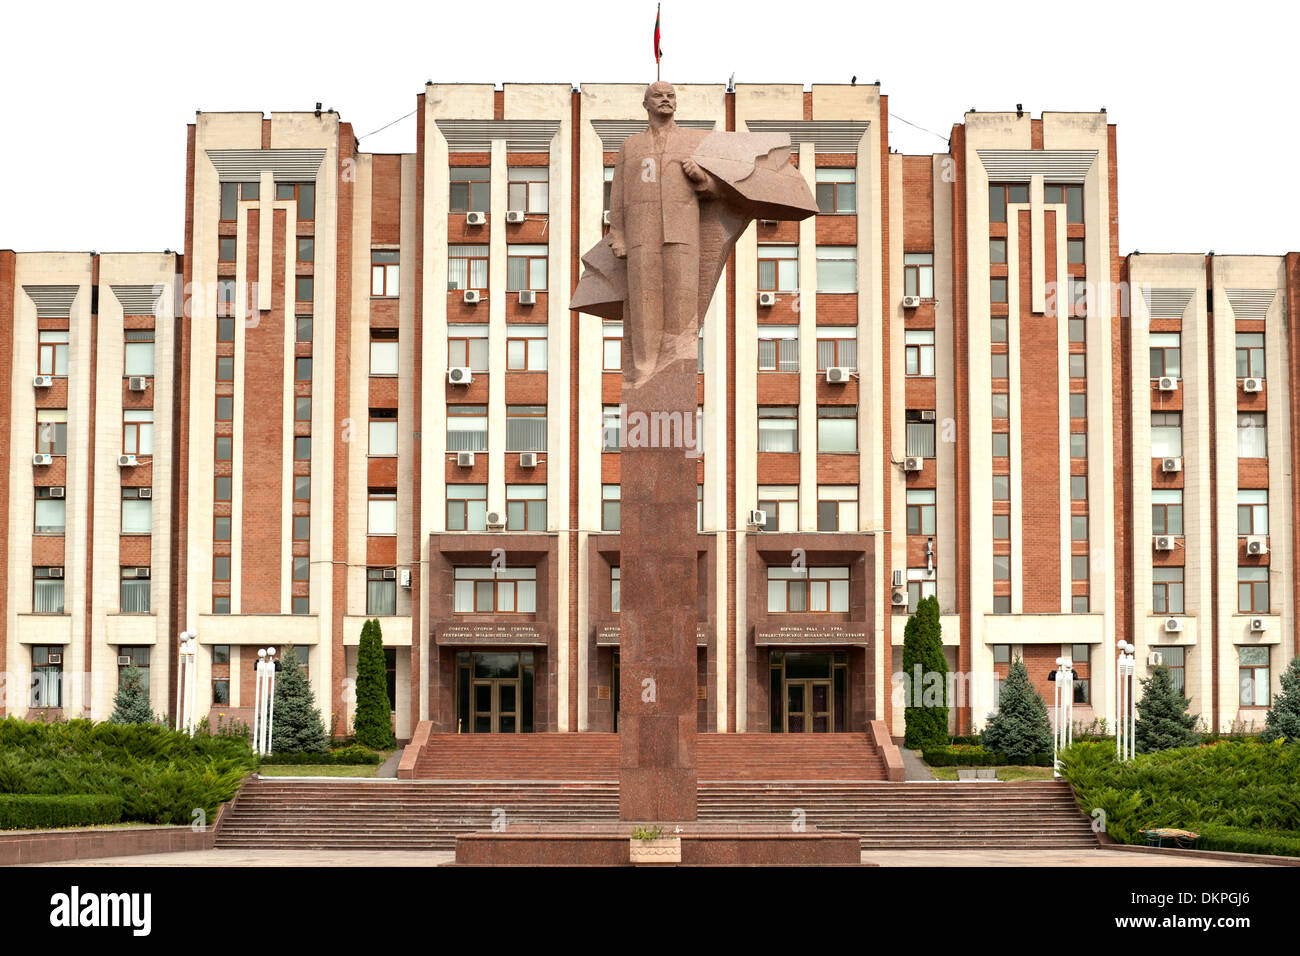 The Transnistrian parliament building and statue of Vladimir Lenin in Tiraspol, the capital of Transnistria. Stock Photo